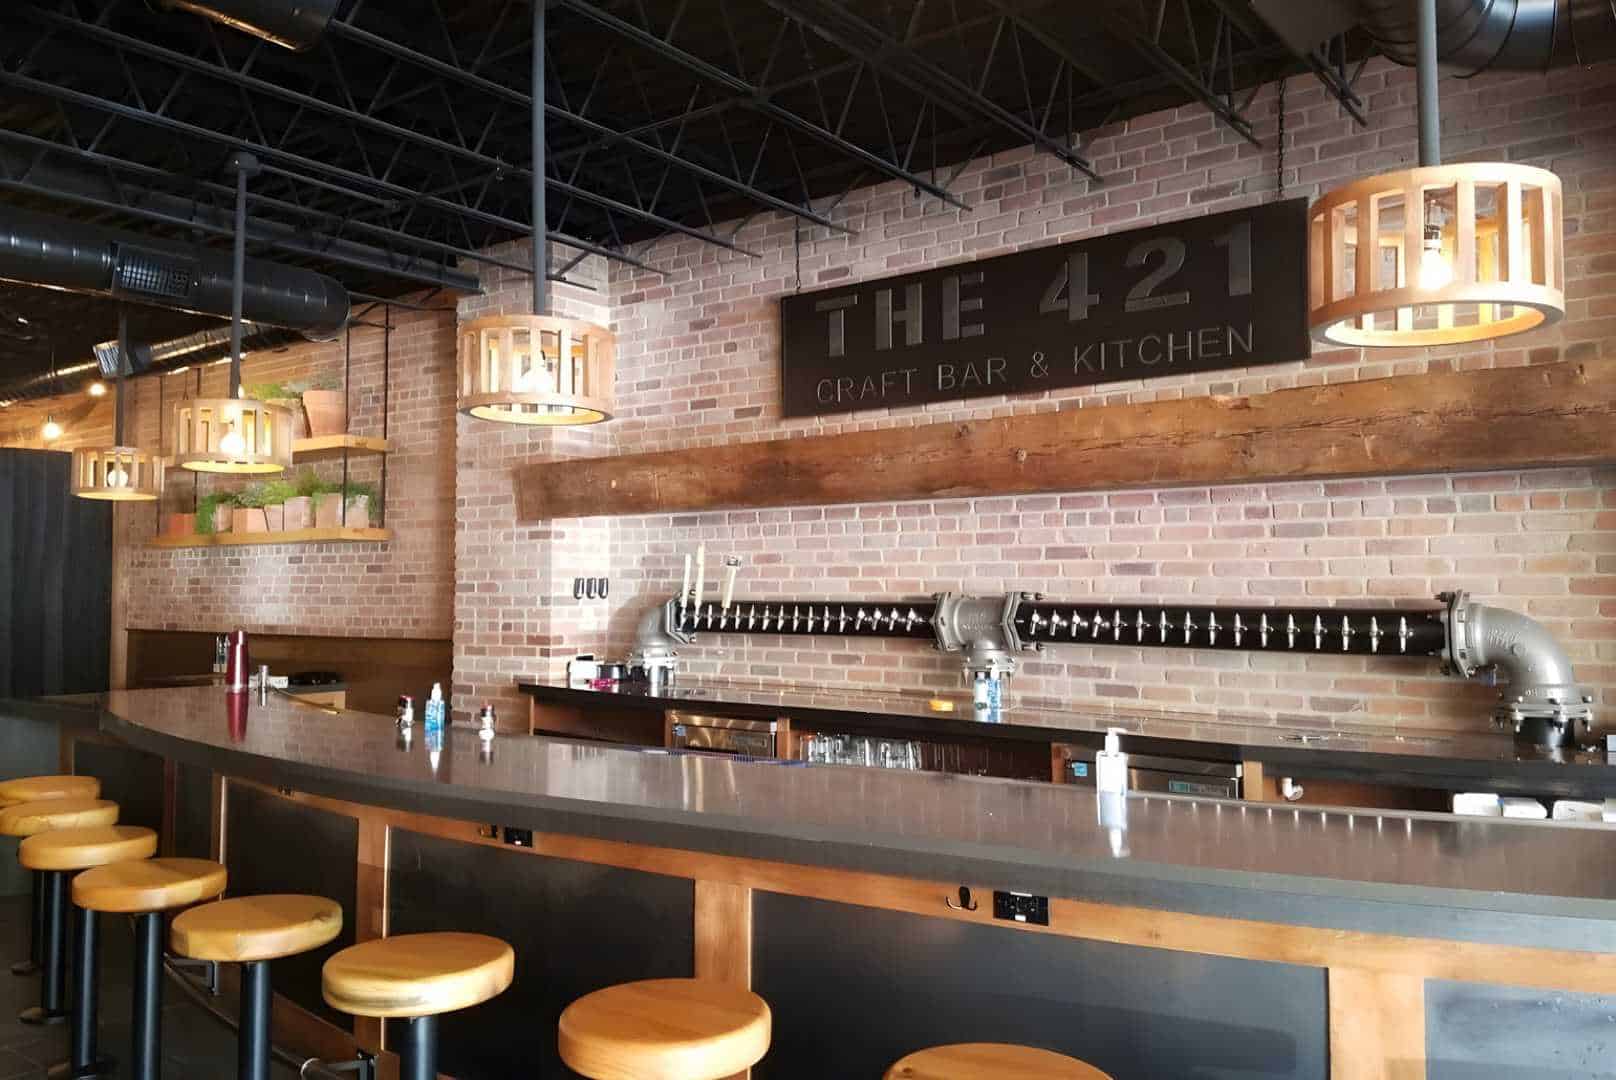 The 421 Craft Bar and Kitchen